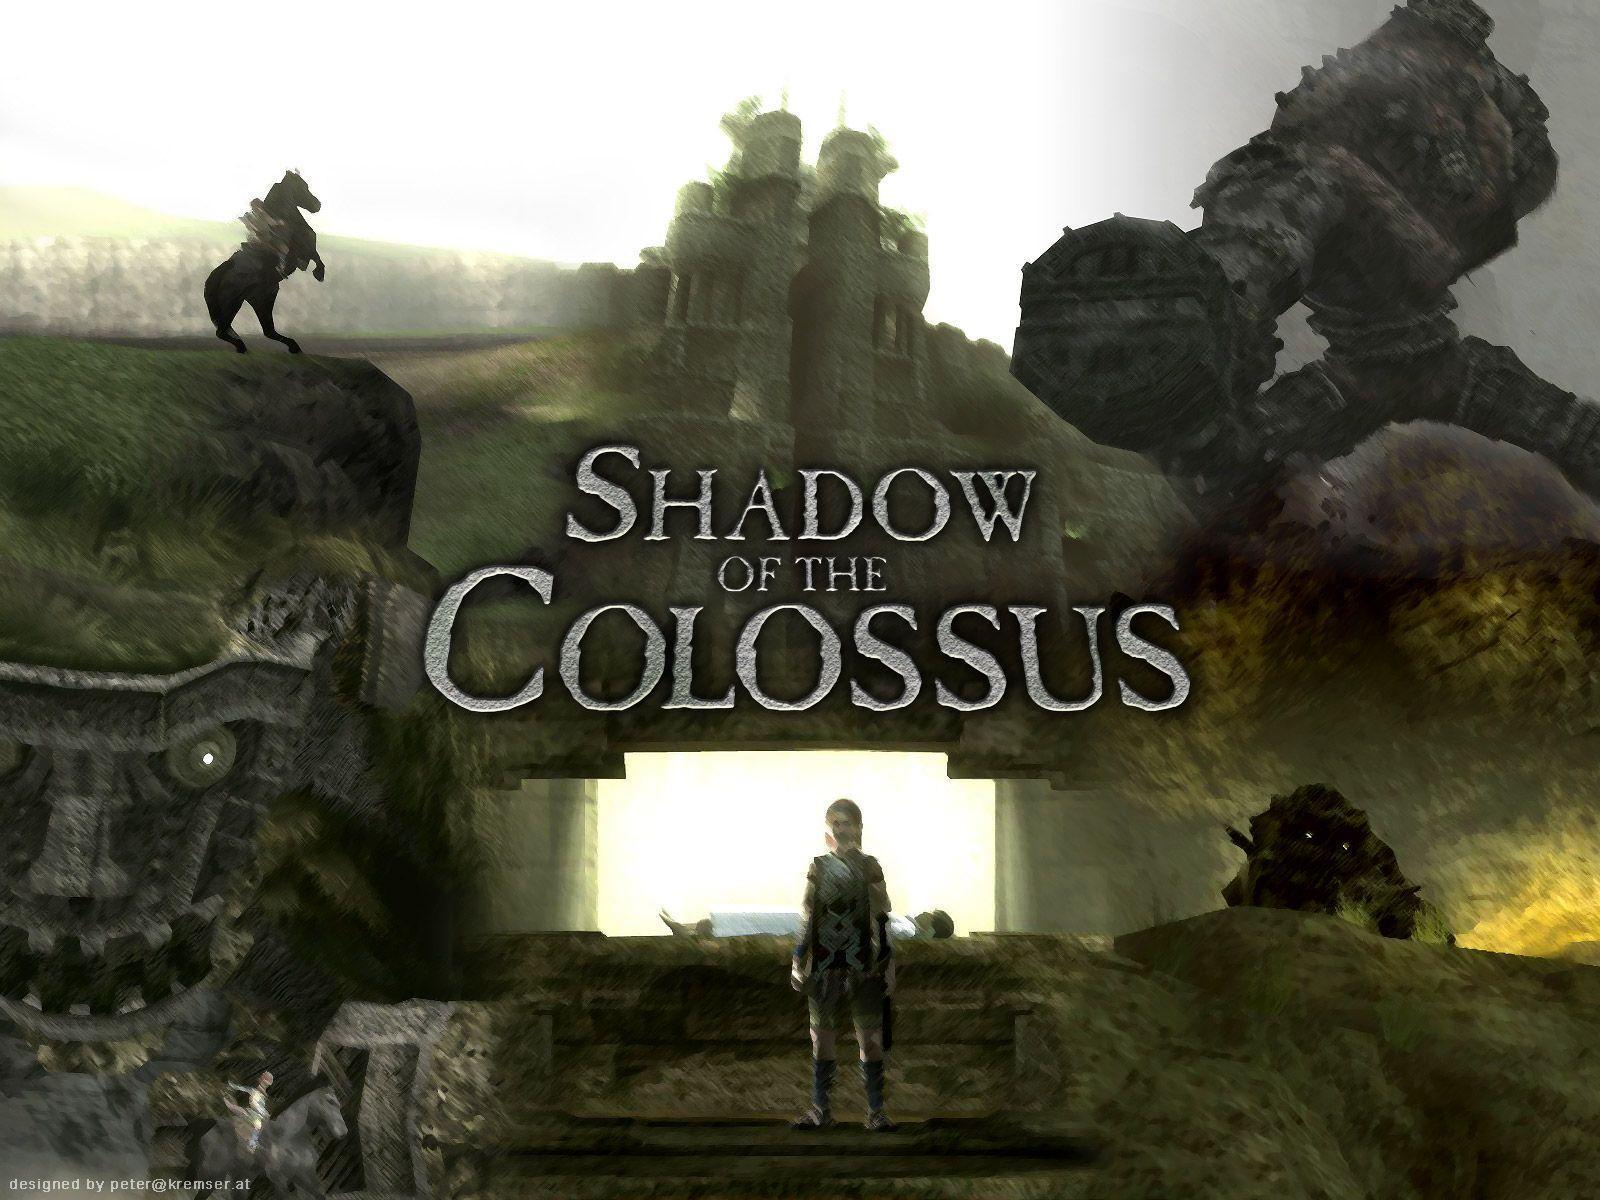 Best image about Shadow of the Colossus. Art